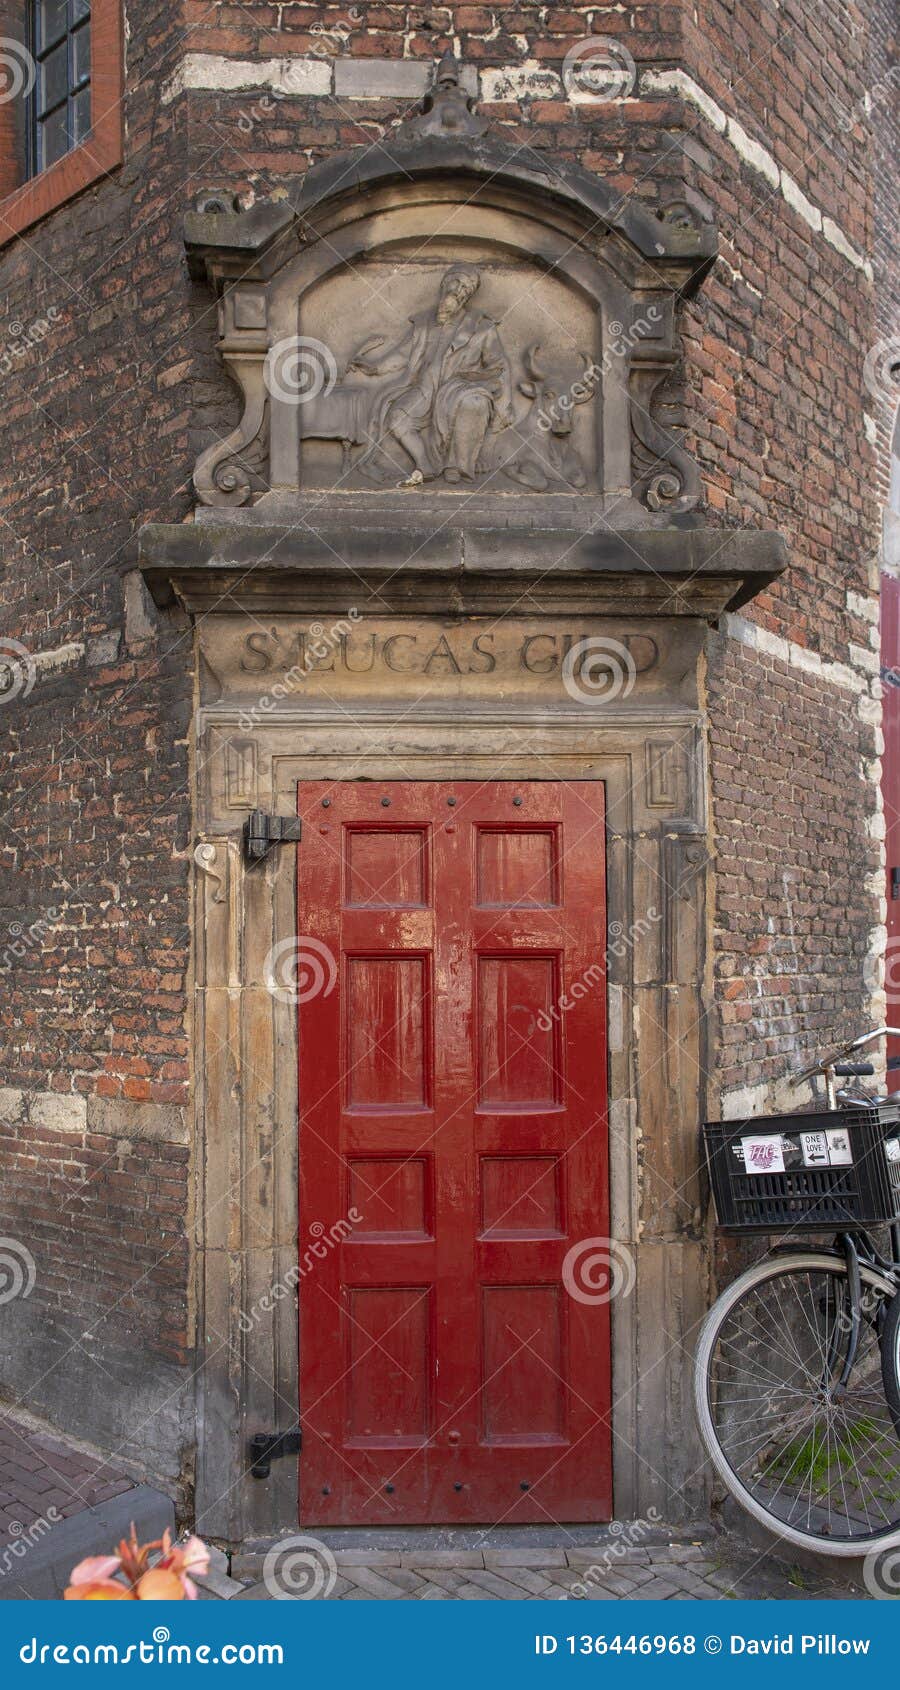 red door and gable stone for s. lucas gild, waag house, amsterdam, the netherlands